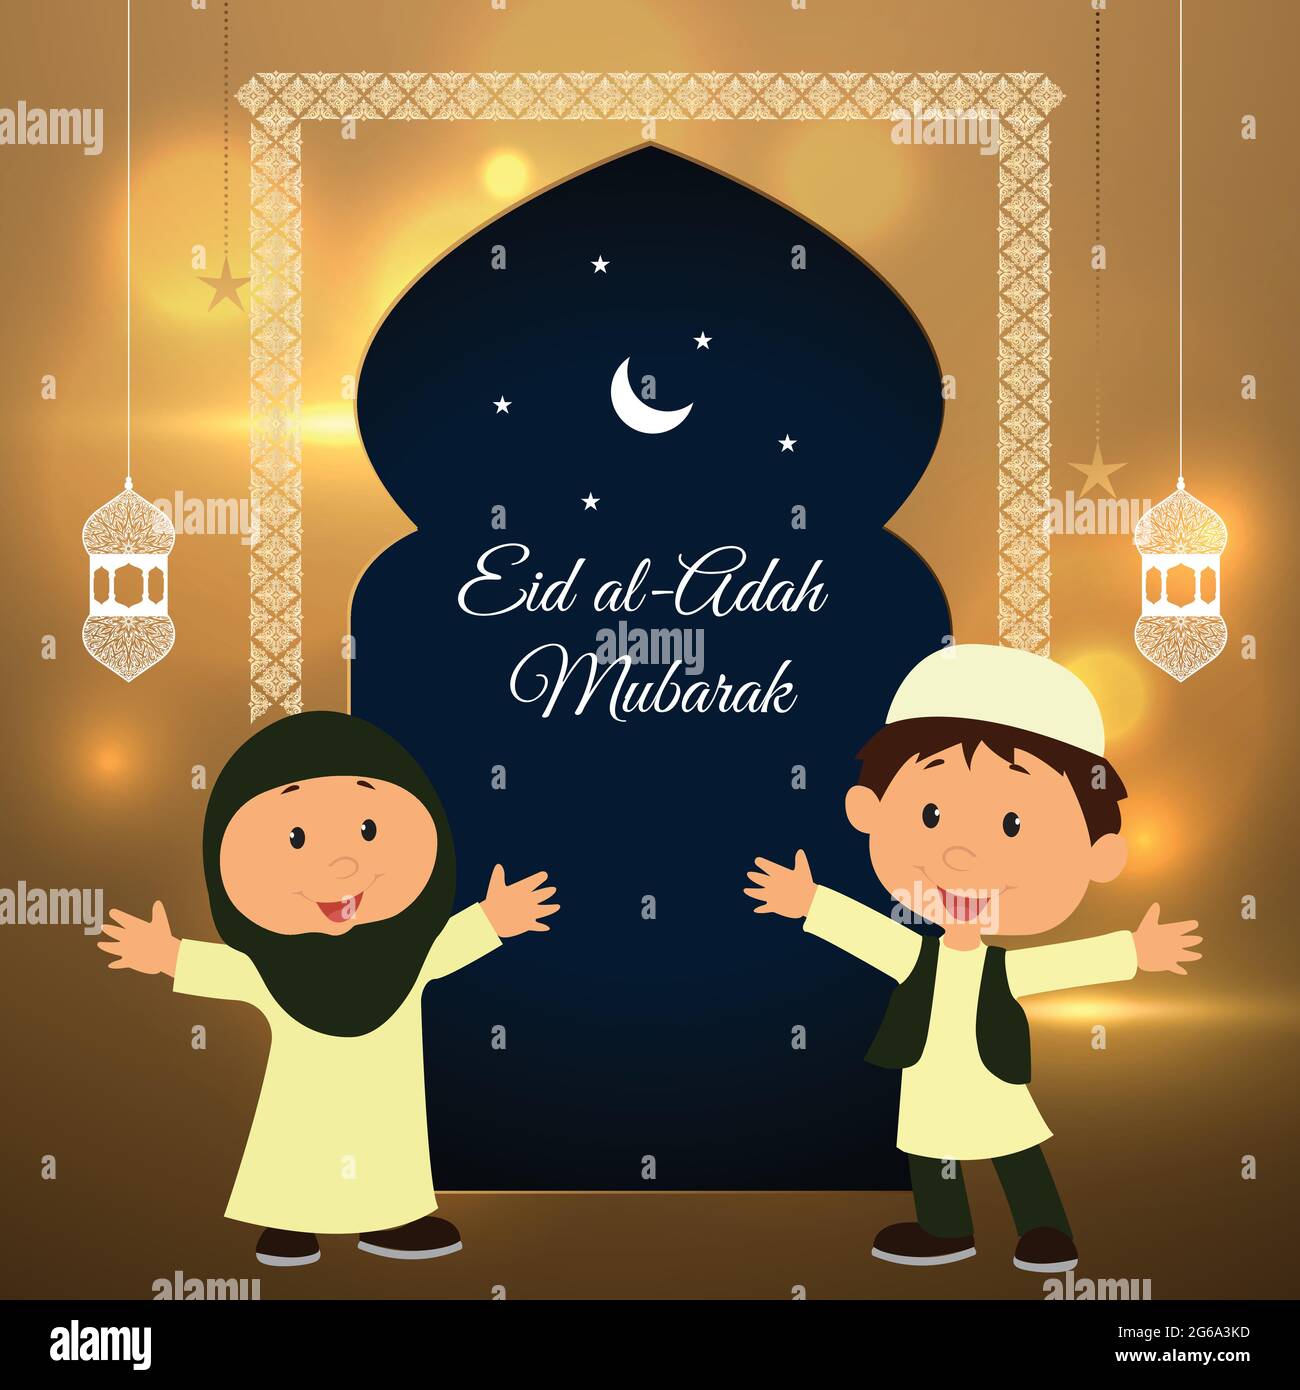 Boy and girl wish each other of Eid al-Adah Mubarak in the Eid night on the golden background Stock Vector